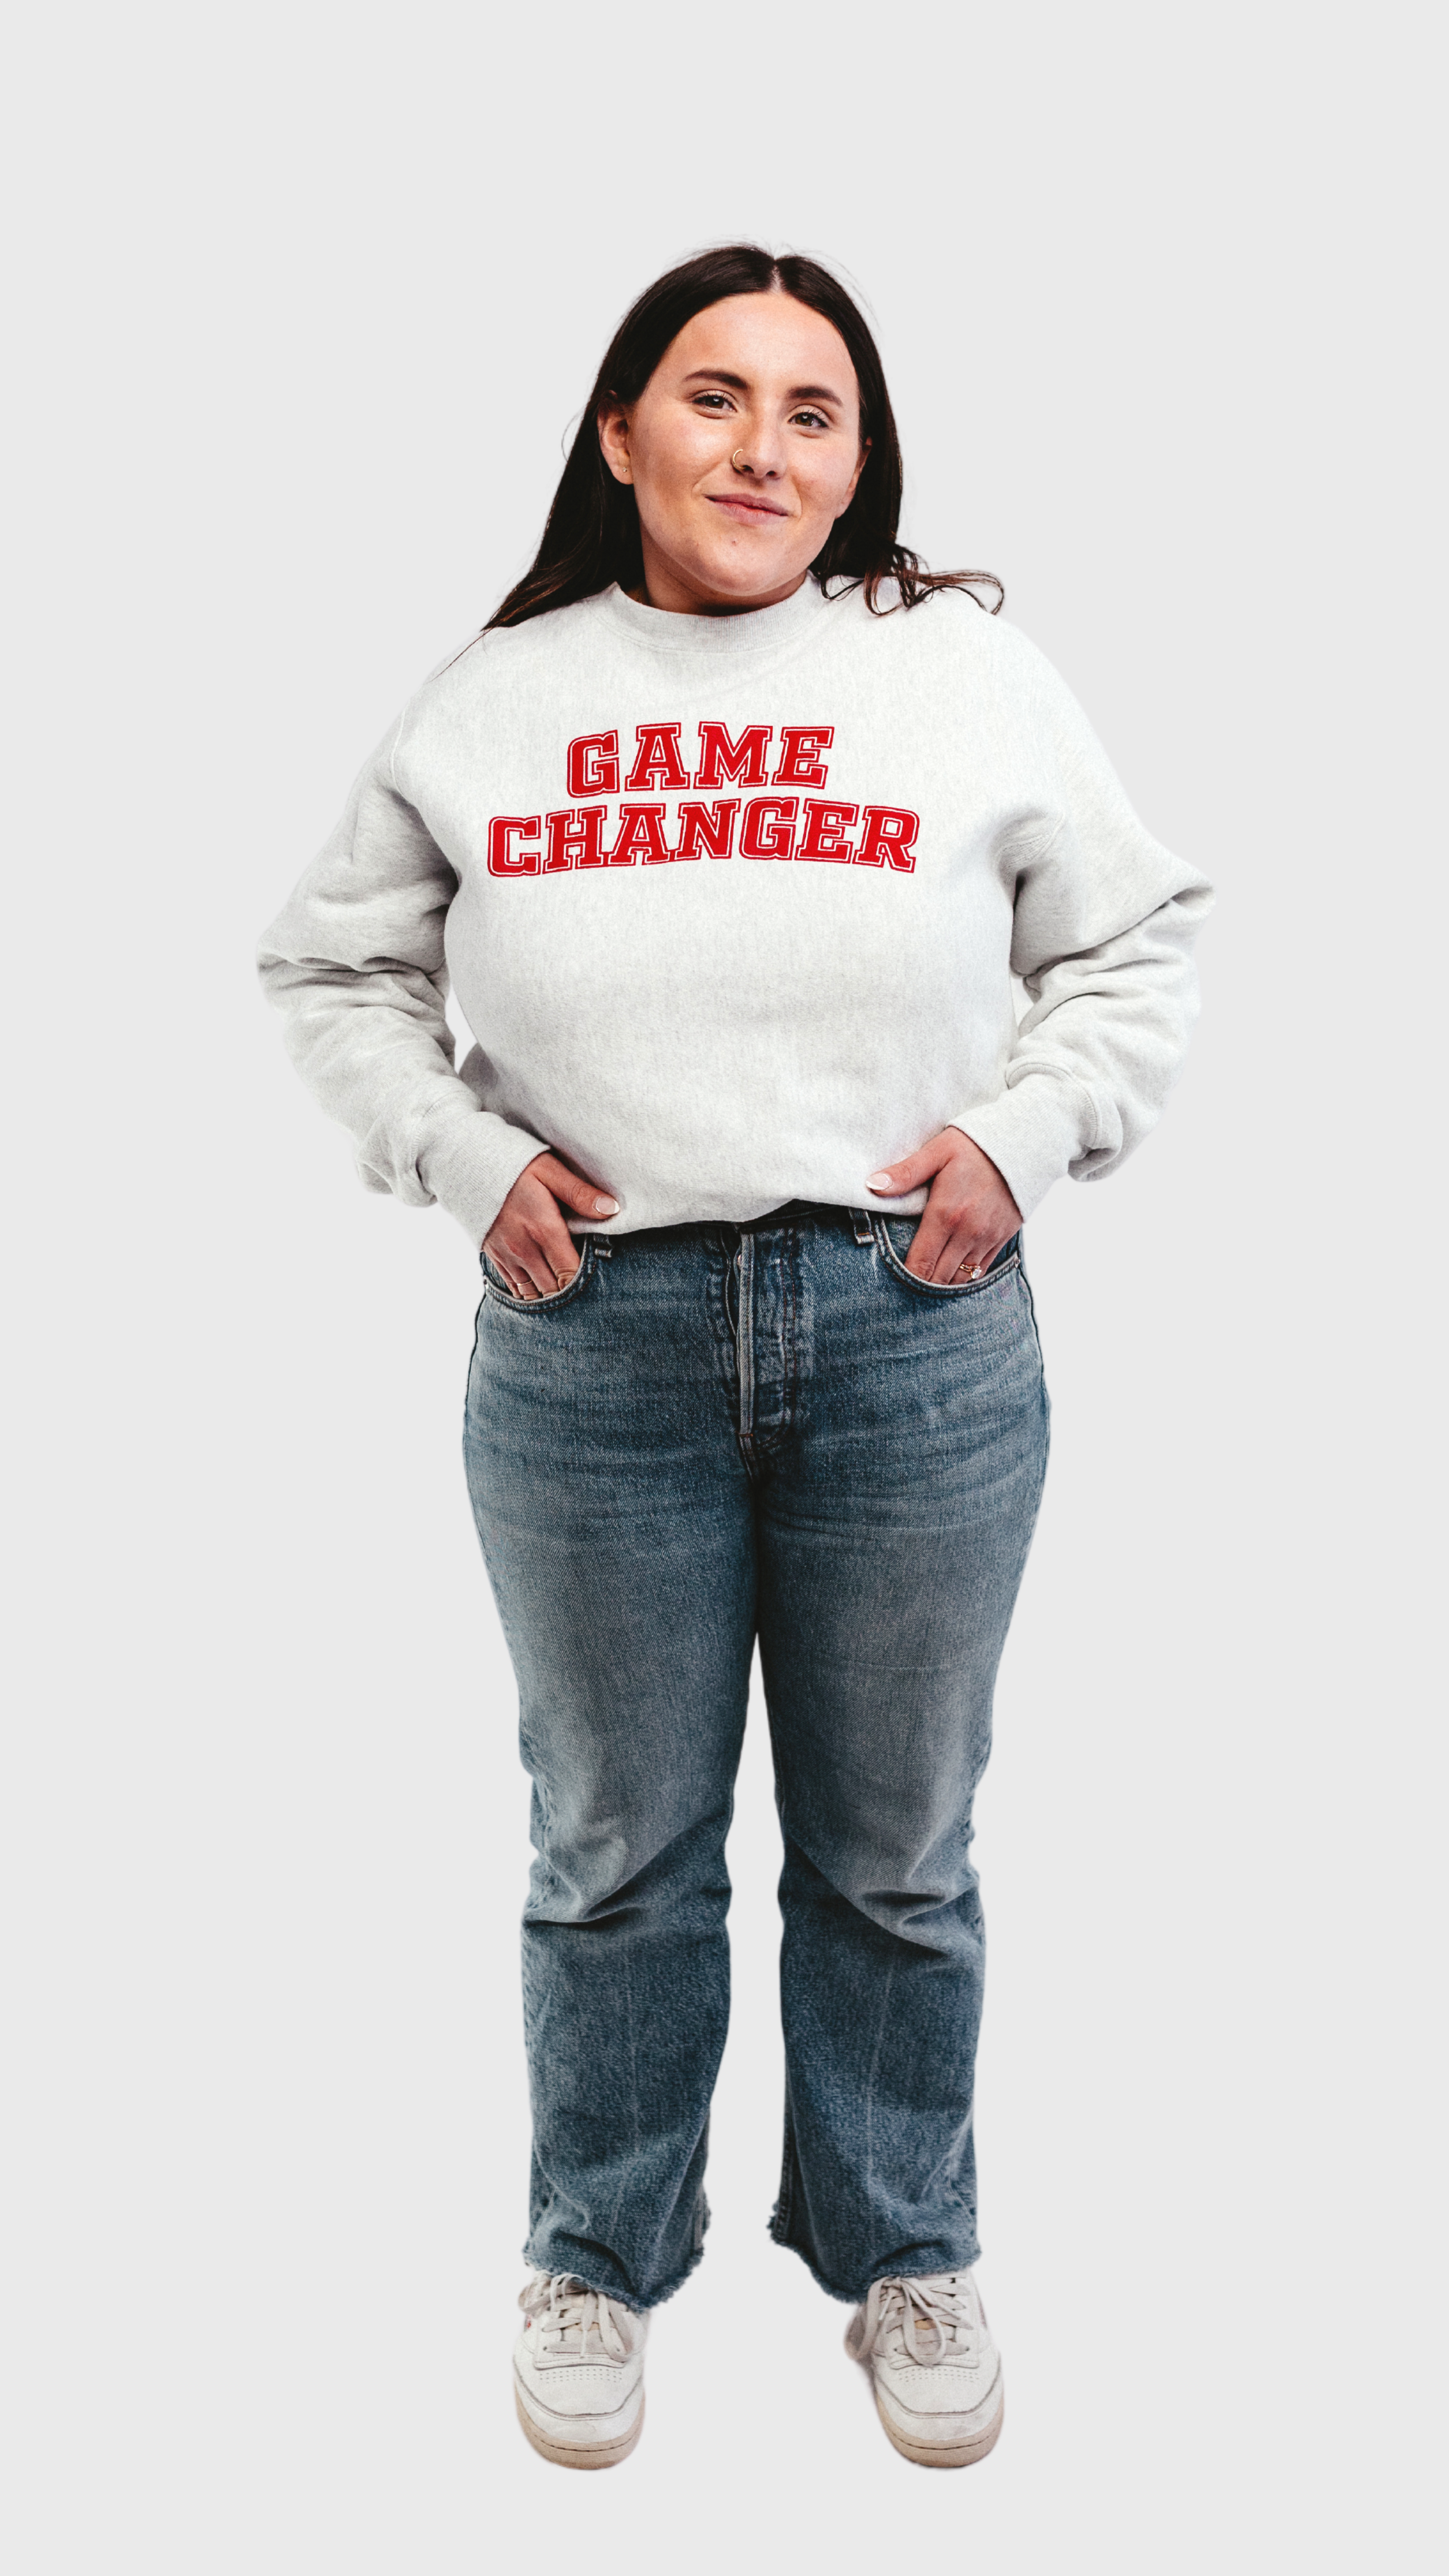 Game Changer Sweatshirt - Increase Marketplace Powered by Imperial Distr. Co., Inc.